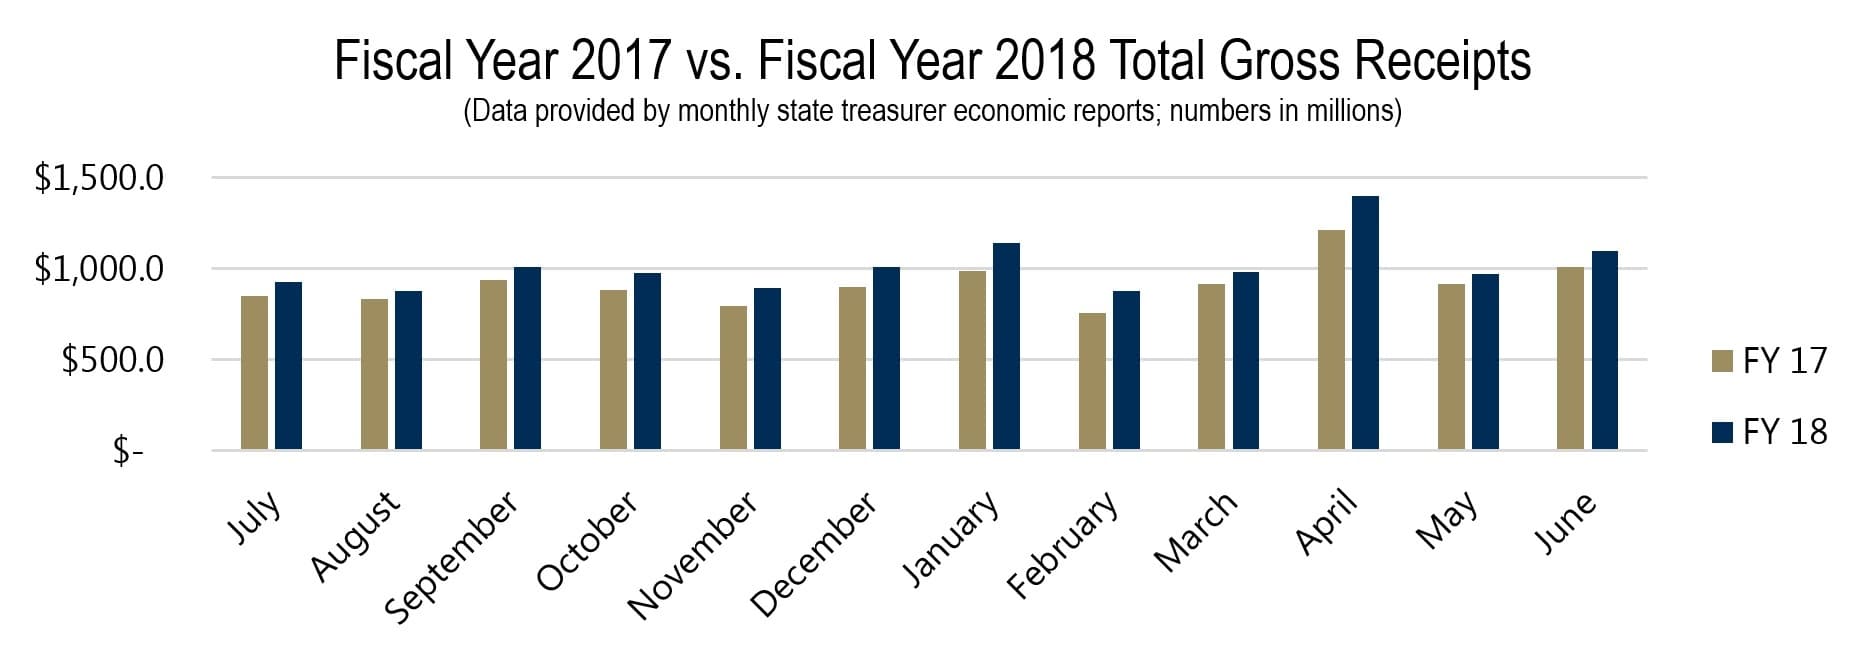 Fiscal Year 2017 vs. Fiscal Year 2018 Total Gross Receipts